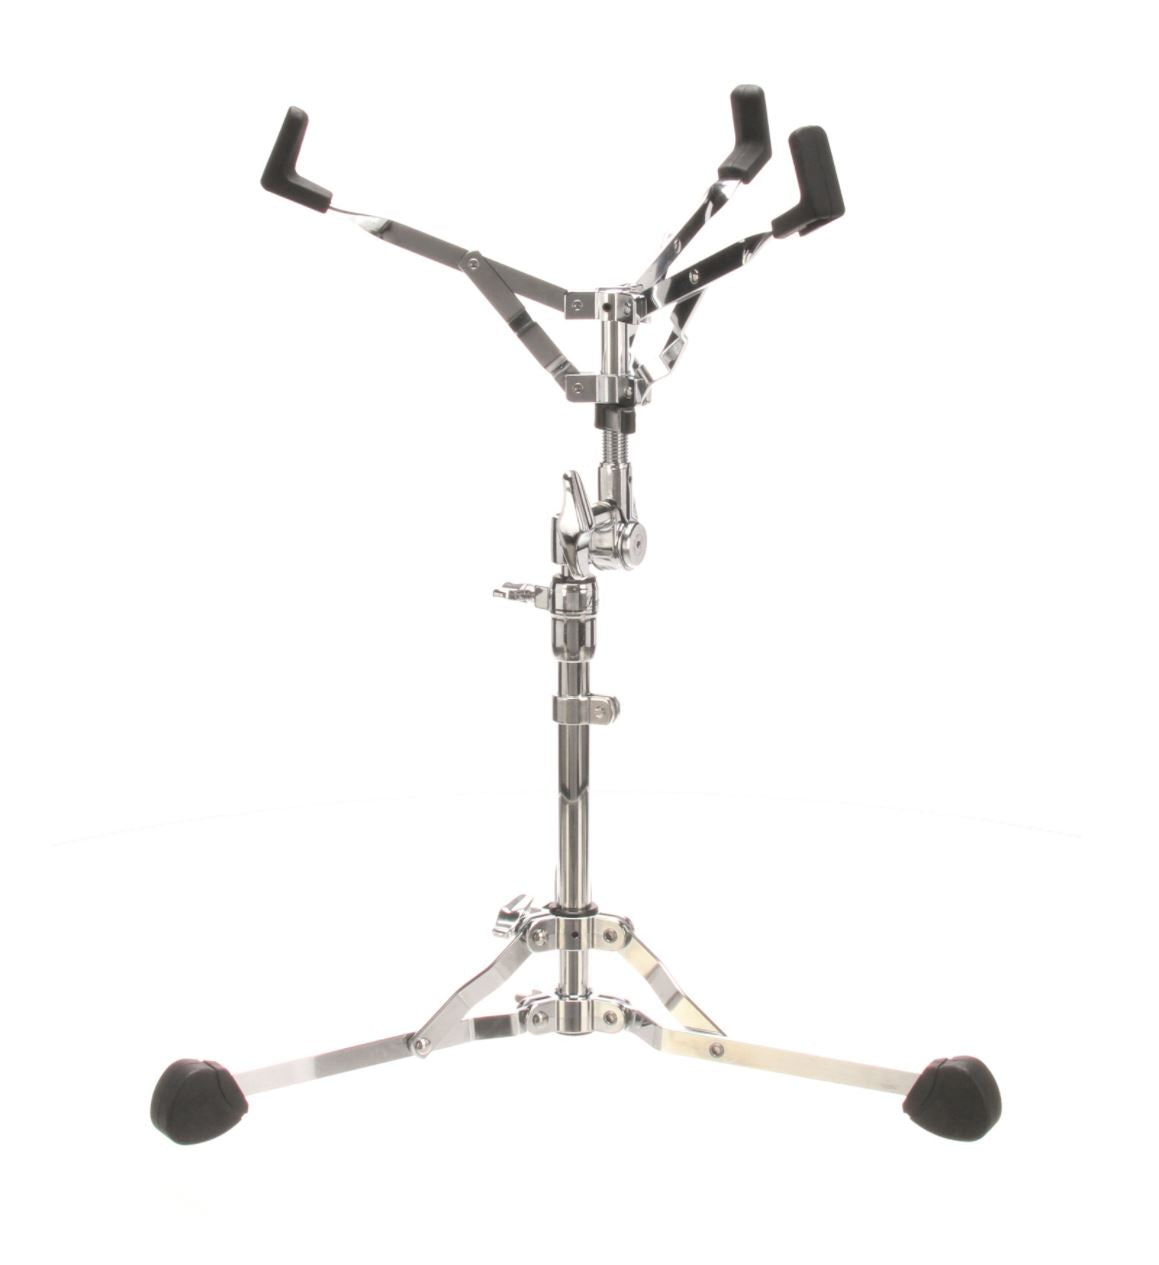 Pearl S150S Snare Drum Stand Adjustable with Single Braced Convertible Flat Tripod Legs, Uni-Lock Tilter for 10 to 14 inch Drums Holder Basket